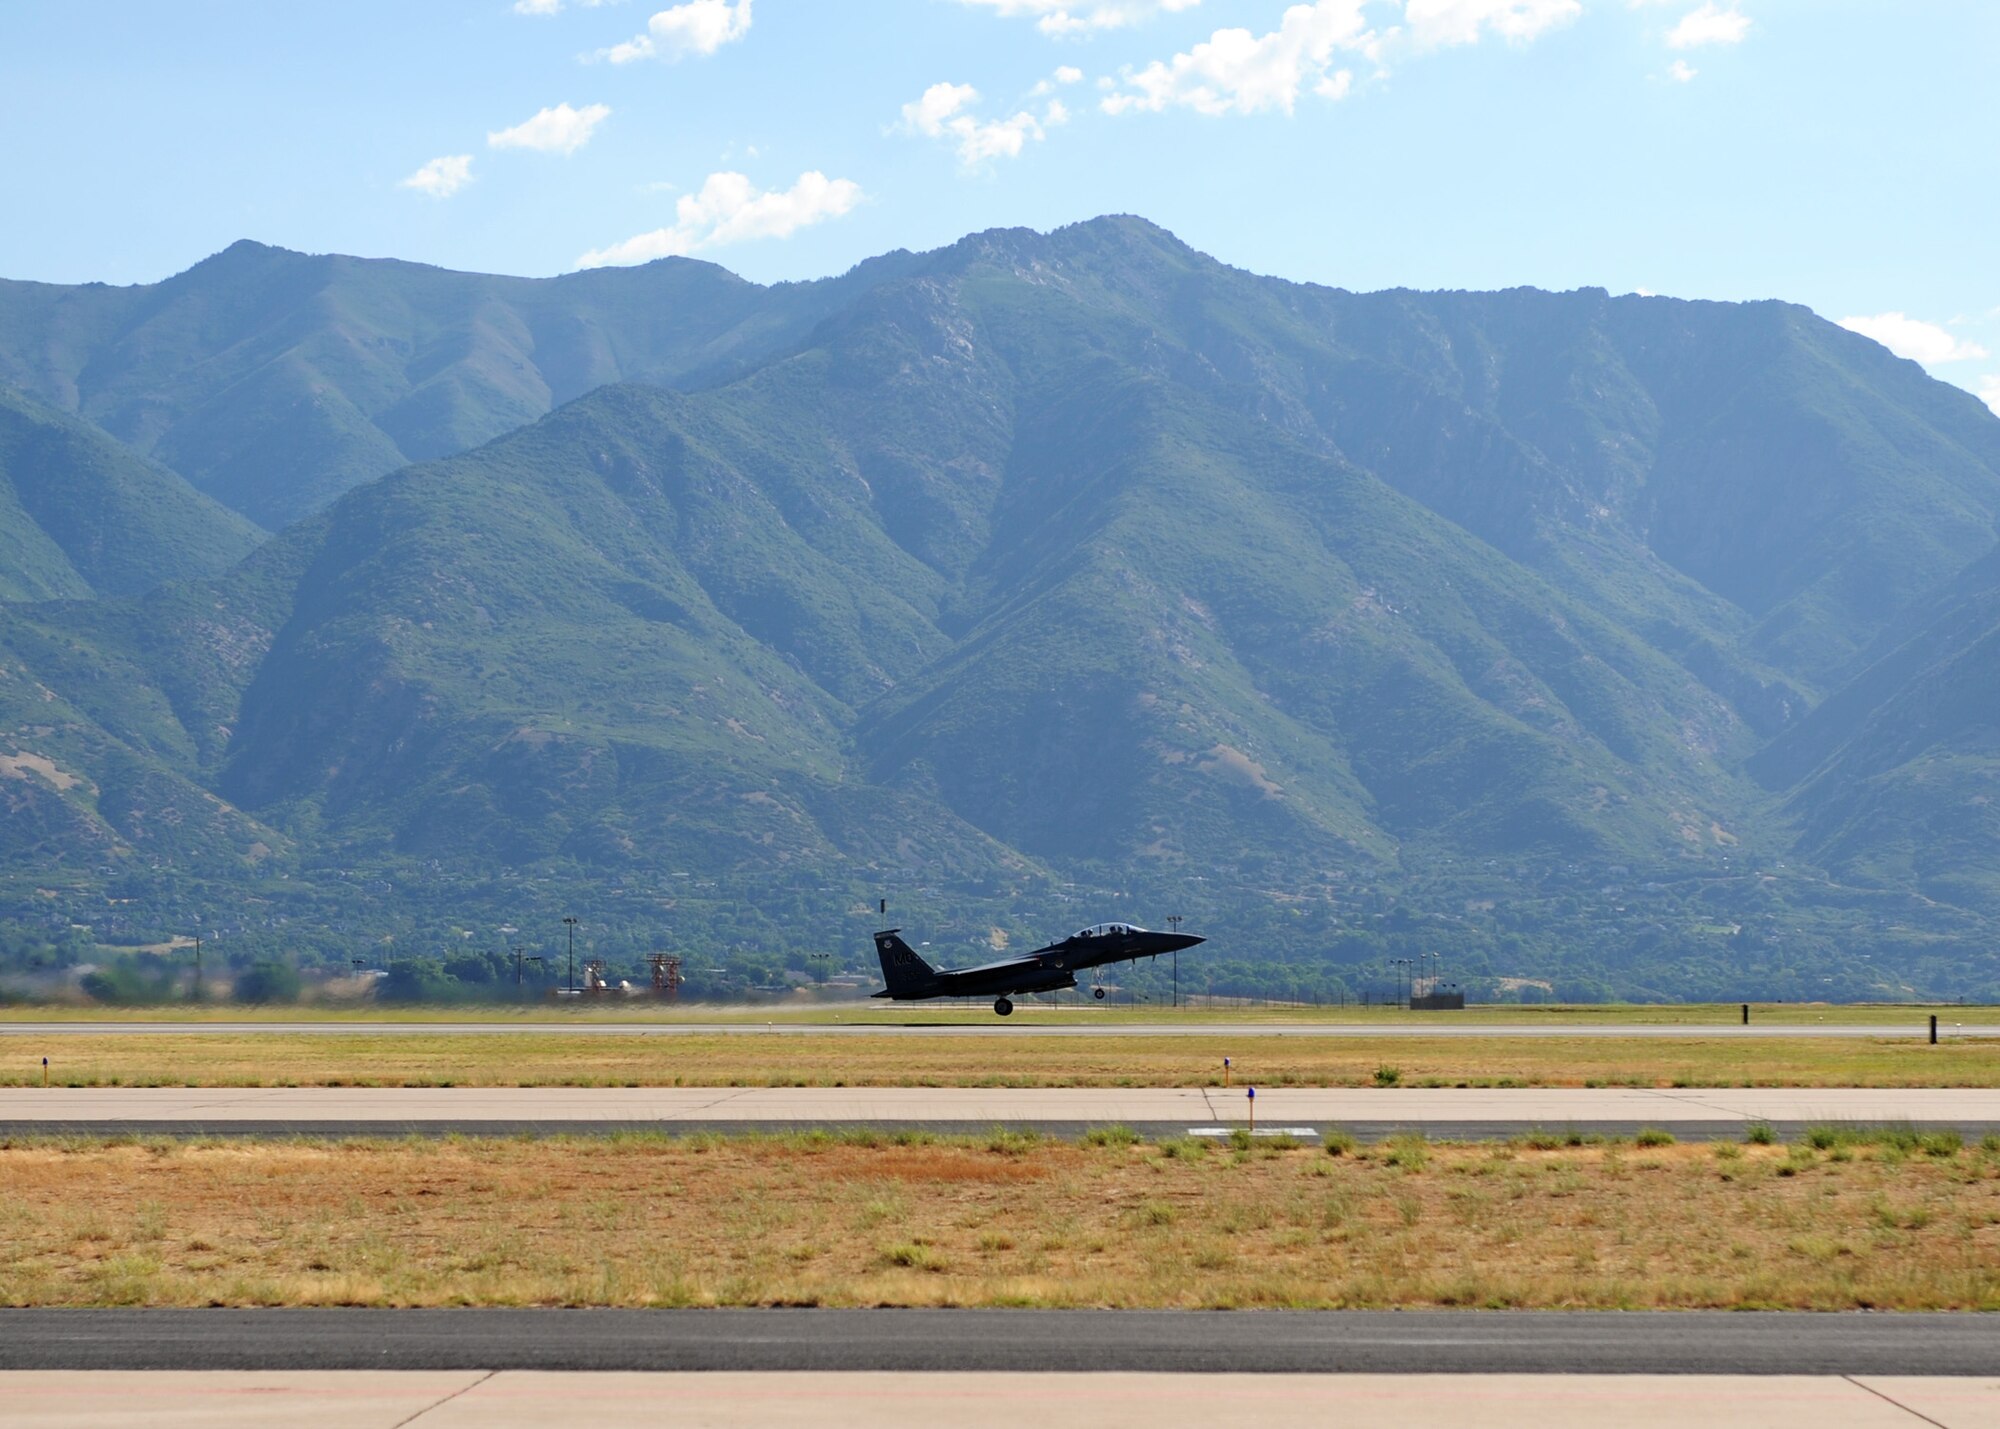 An F-15E Strike Eagle from the 391st Fighter Squadron lifts off for a Combat Hammer mission at Hill Air Force Base, Utah.  Combat Hammer is an air-to-ground Weapons System Evaluation Program maintained by the 86th Fighter Weapons Squadron.  Combat Hammer marked the first of three weeks of evaluation at Hill AFB by the 53rd Weapons Evaluation Group.  Combat Archer, an air-to-air evaluation, is the second week, followed by a combined air and ground WSEP in the final week.  The WSEP program is used to evaluate the effectiveness and suitability of combat air force weapon systems. The evaluations are accomplished during tactical deliveries of fighter, bomber and unmanned aerial system precision guided munitions, on realistic targets with air-to-air and surface-to-air defenses. For many of the aircrew participating in WSEP, it is the first time employing live weapons. This provides a level of combat experience many units face during combat. (Courtesy photo.)
